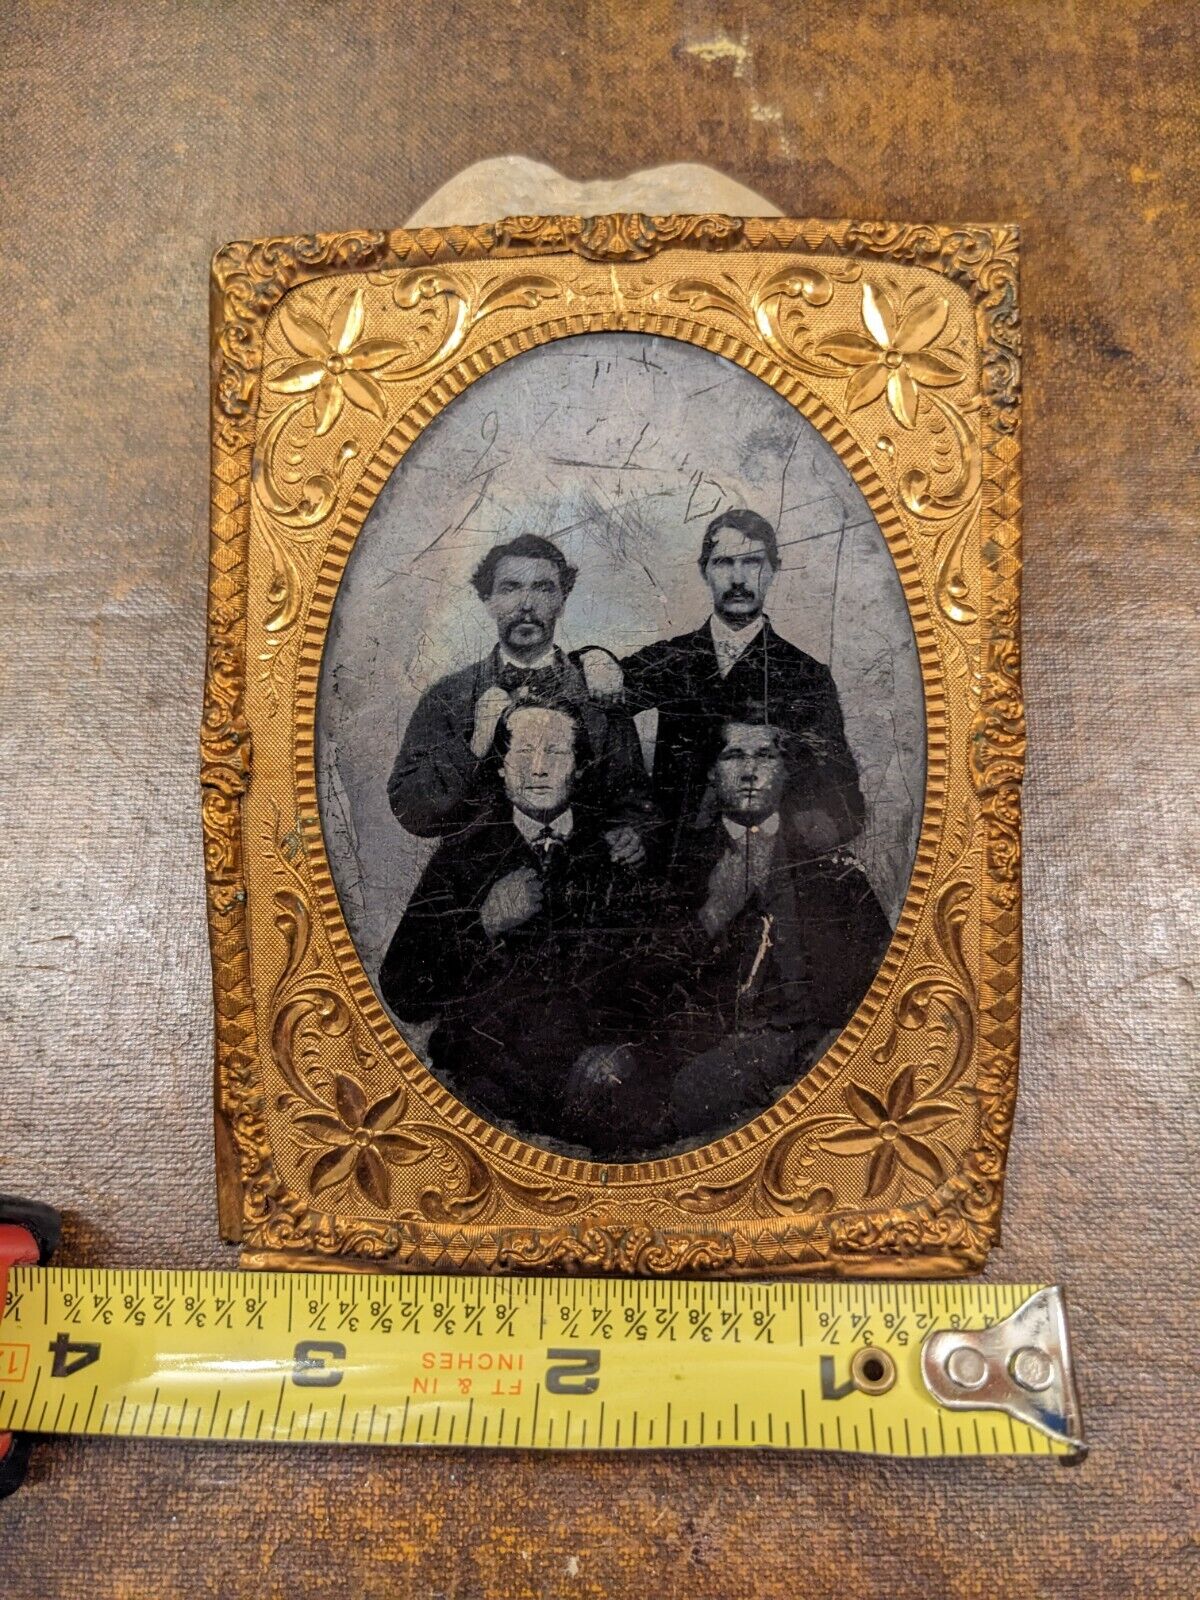 Mid 1800s larger tintype four nicely posed gentlemen with embossed metal frame